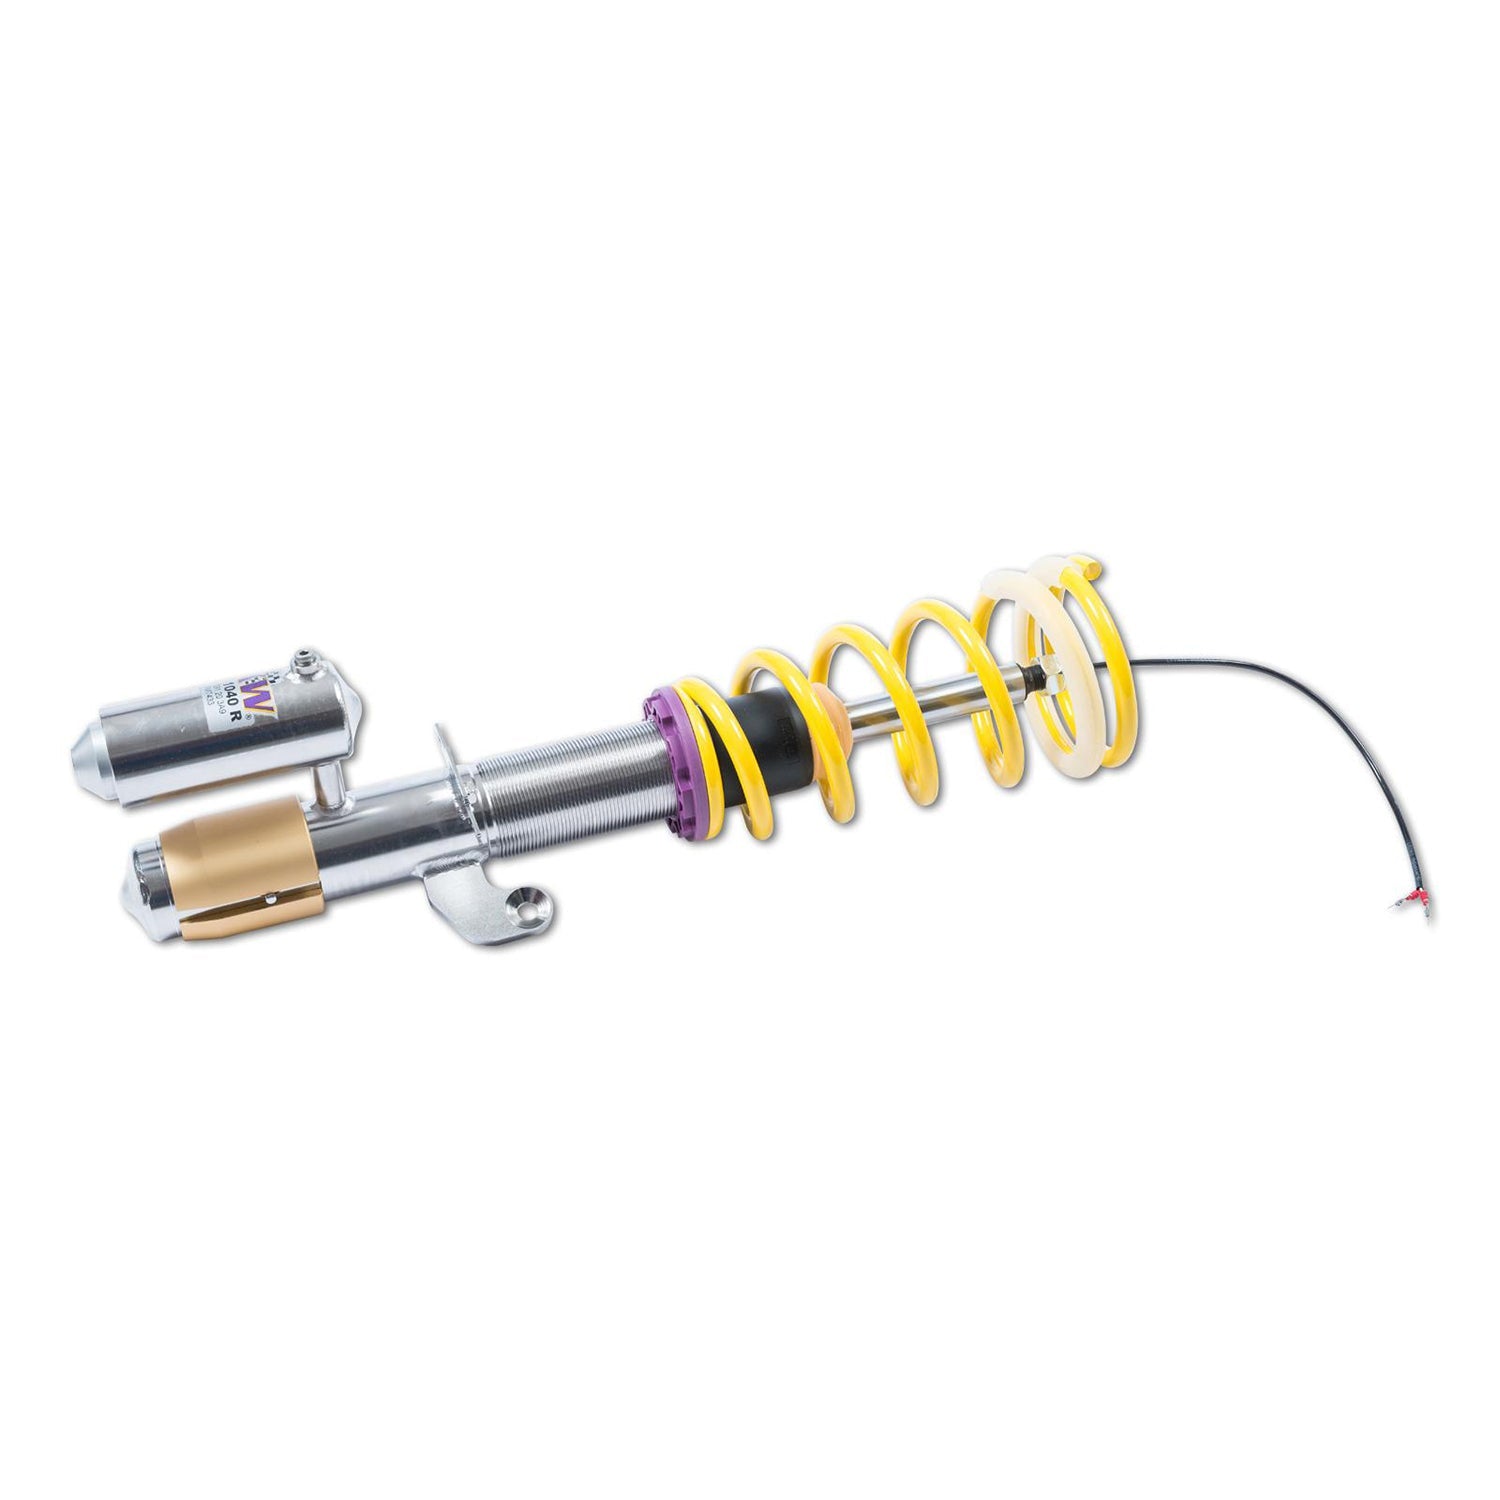 KW BMW M3/M4 DDC Plug & Play Coilover Kit (F80/F82) With EDC-R44 Performance